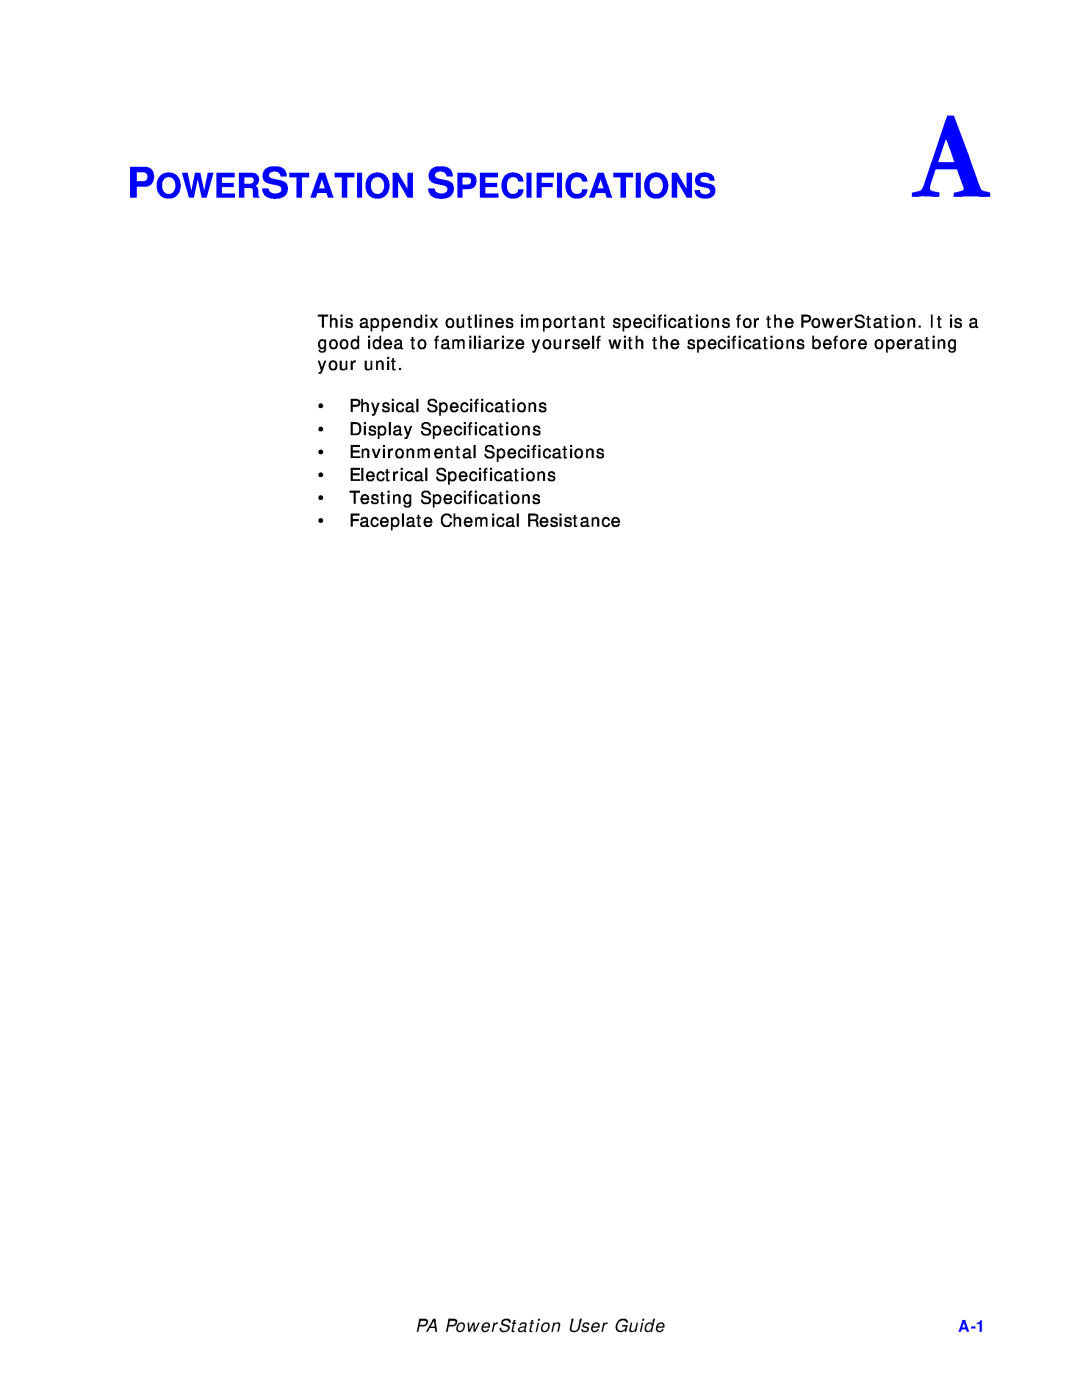 Parker Hannifin PA Series manual Powerstation Specifications, PA PowerStation User Guide 